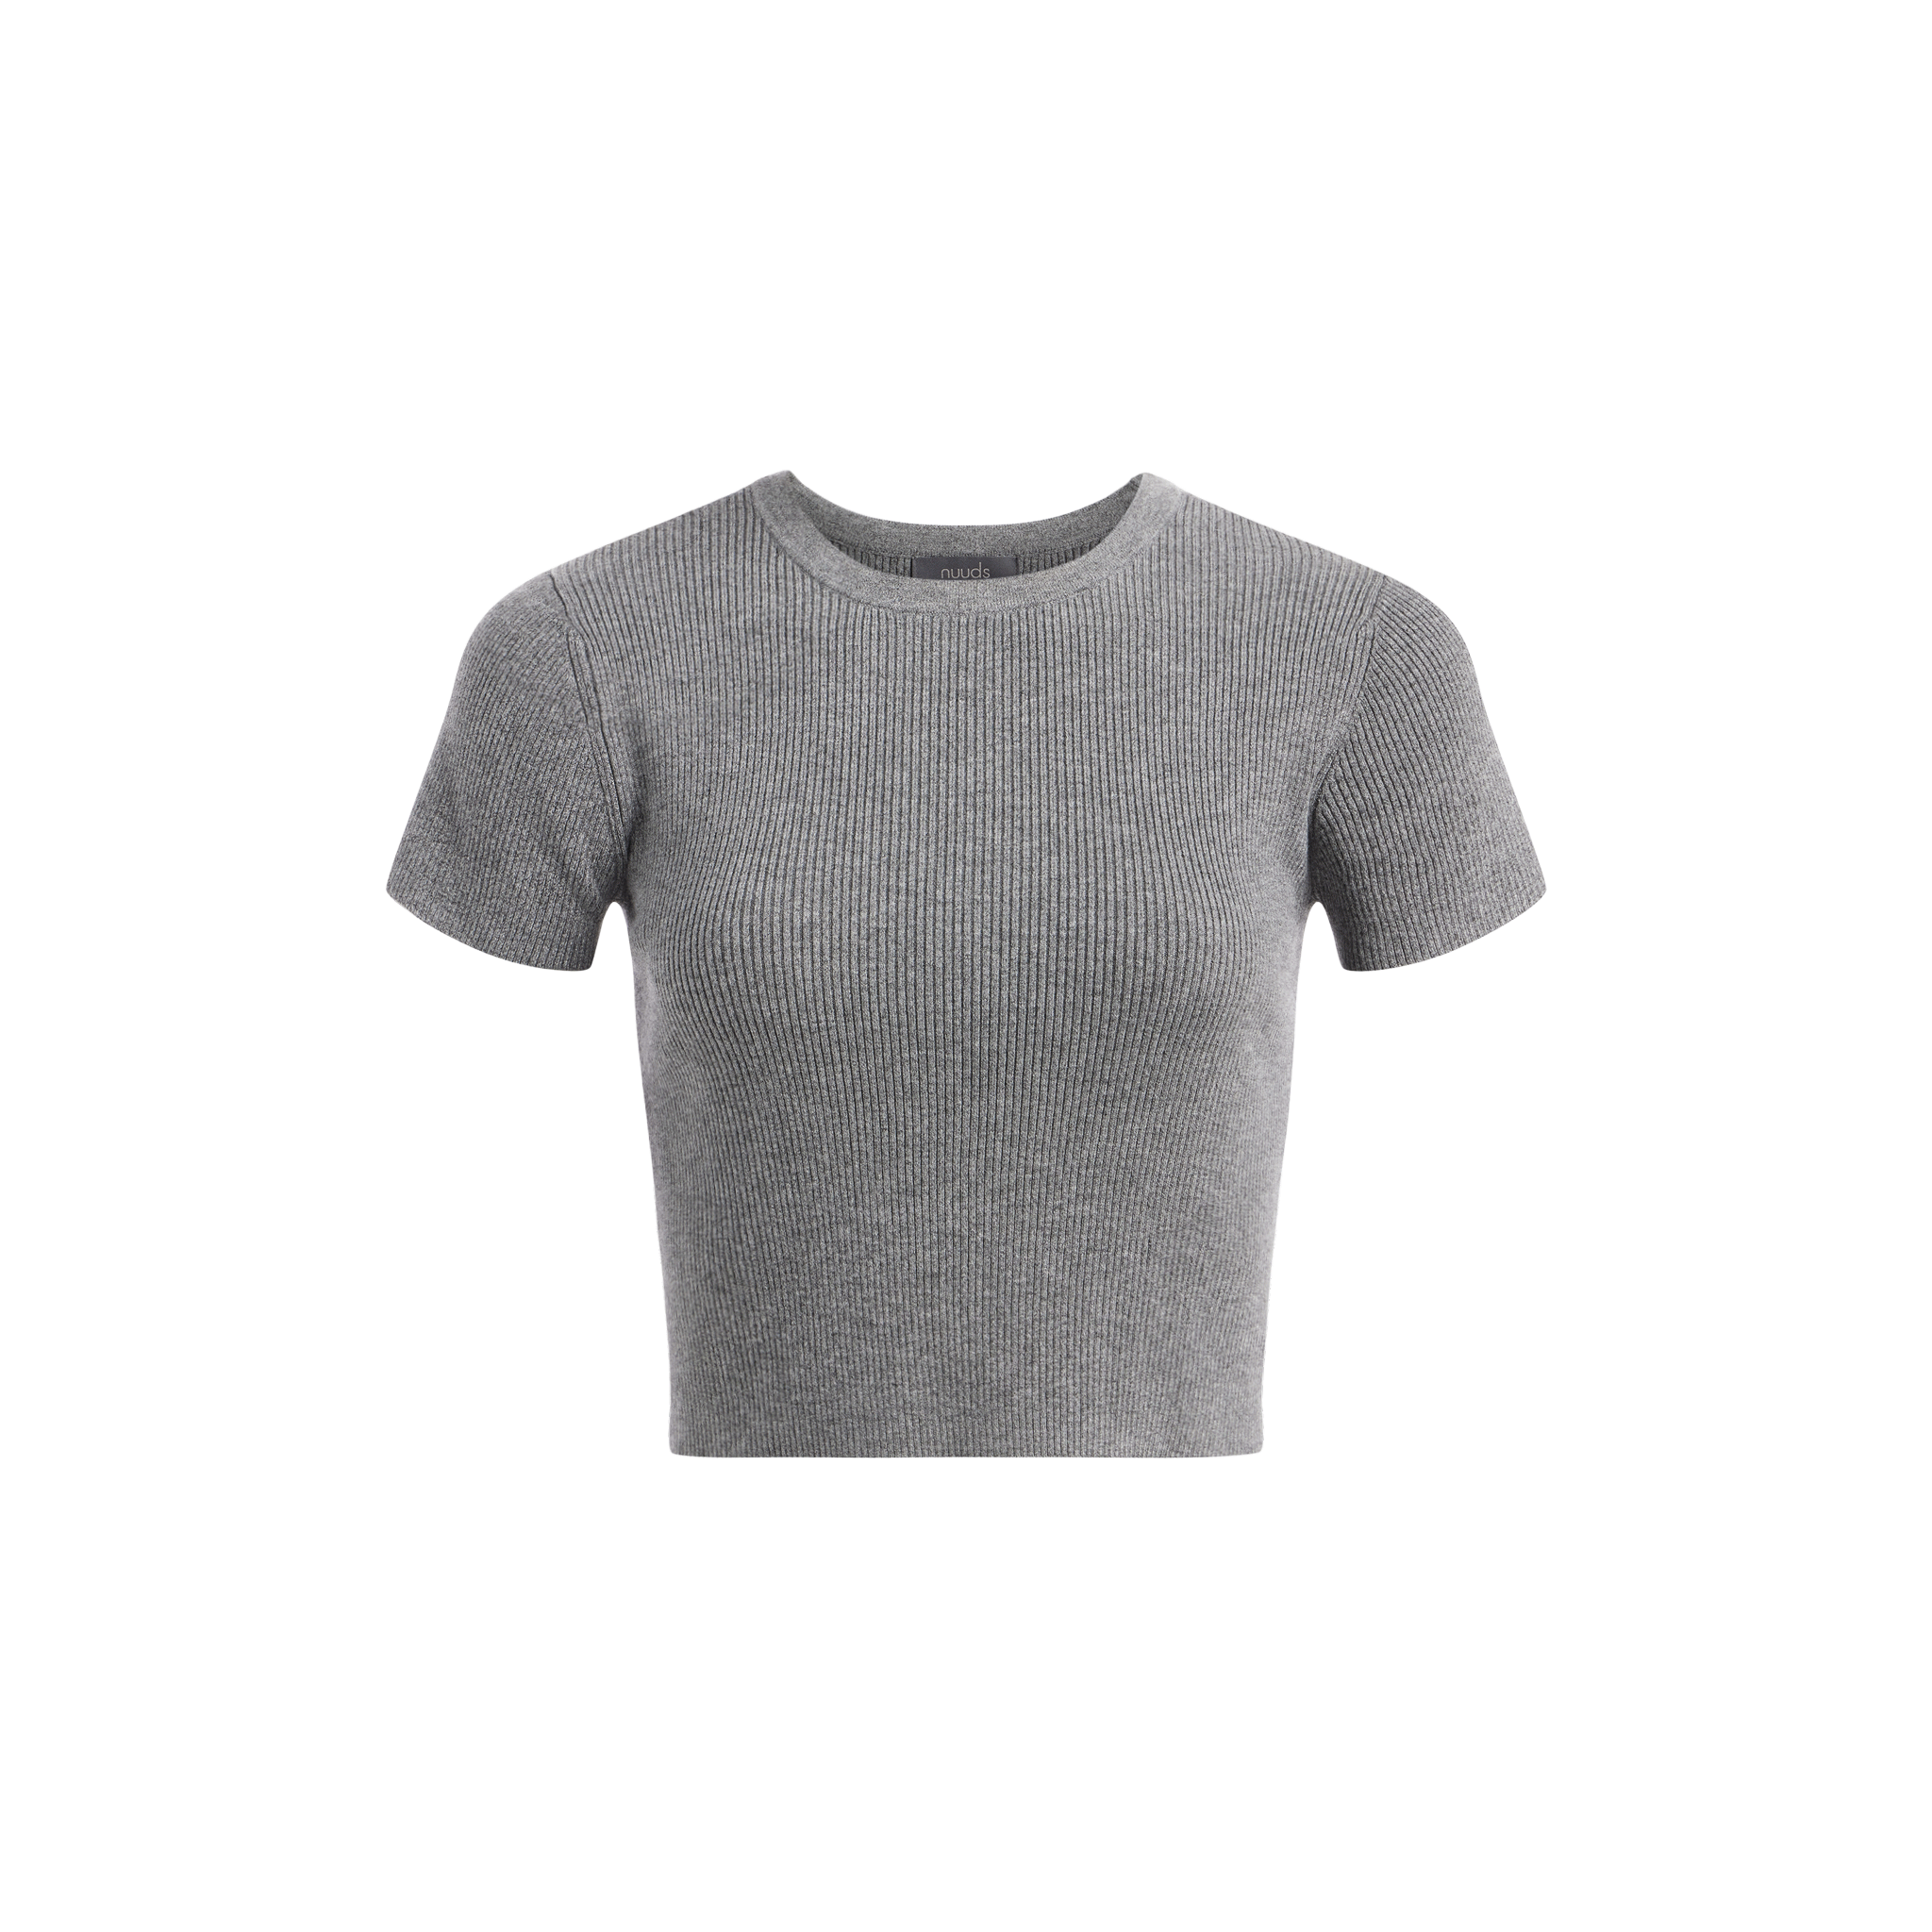 Ribbed Sweater Baby Tee | Charcoal